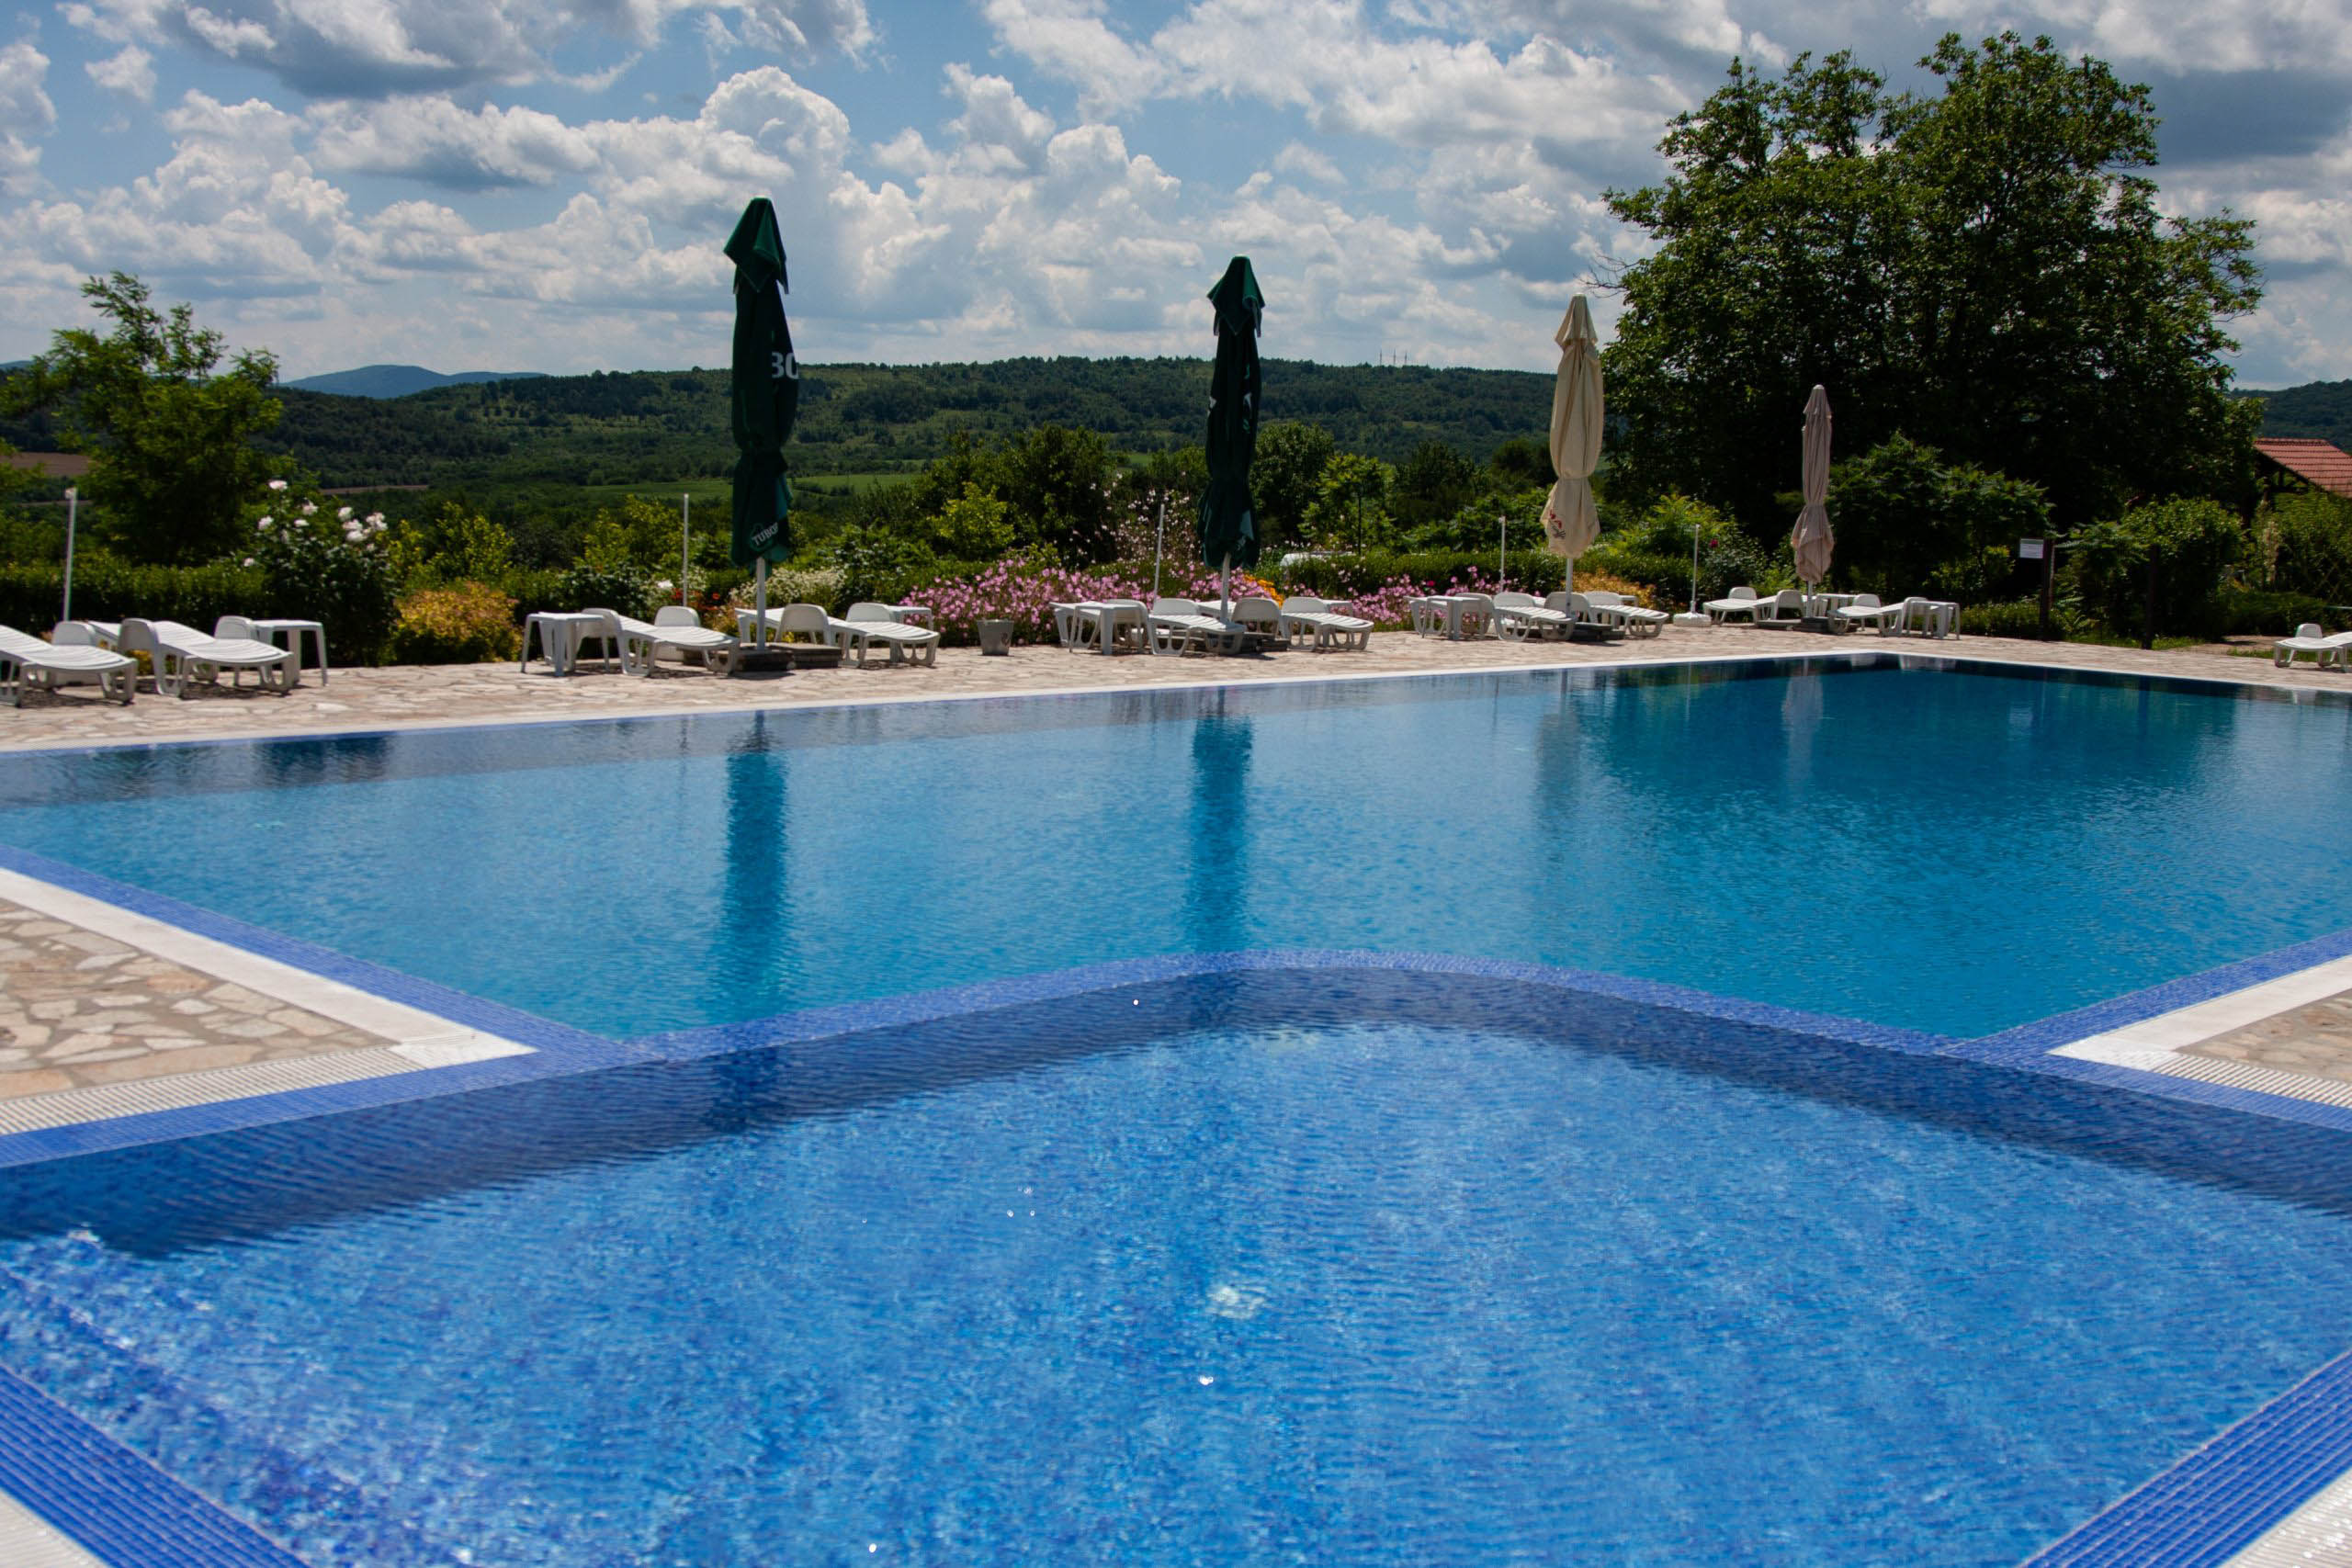 Swimming Pool Terrace with Sunbeds and flowers at Camping Veliko Tarnovo, Bulgaria.